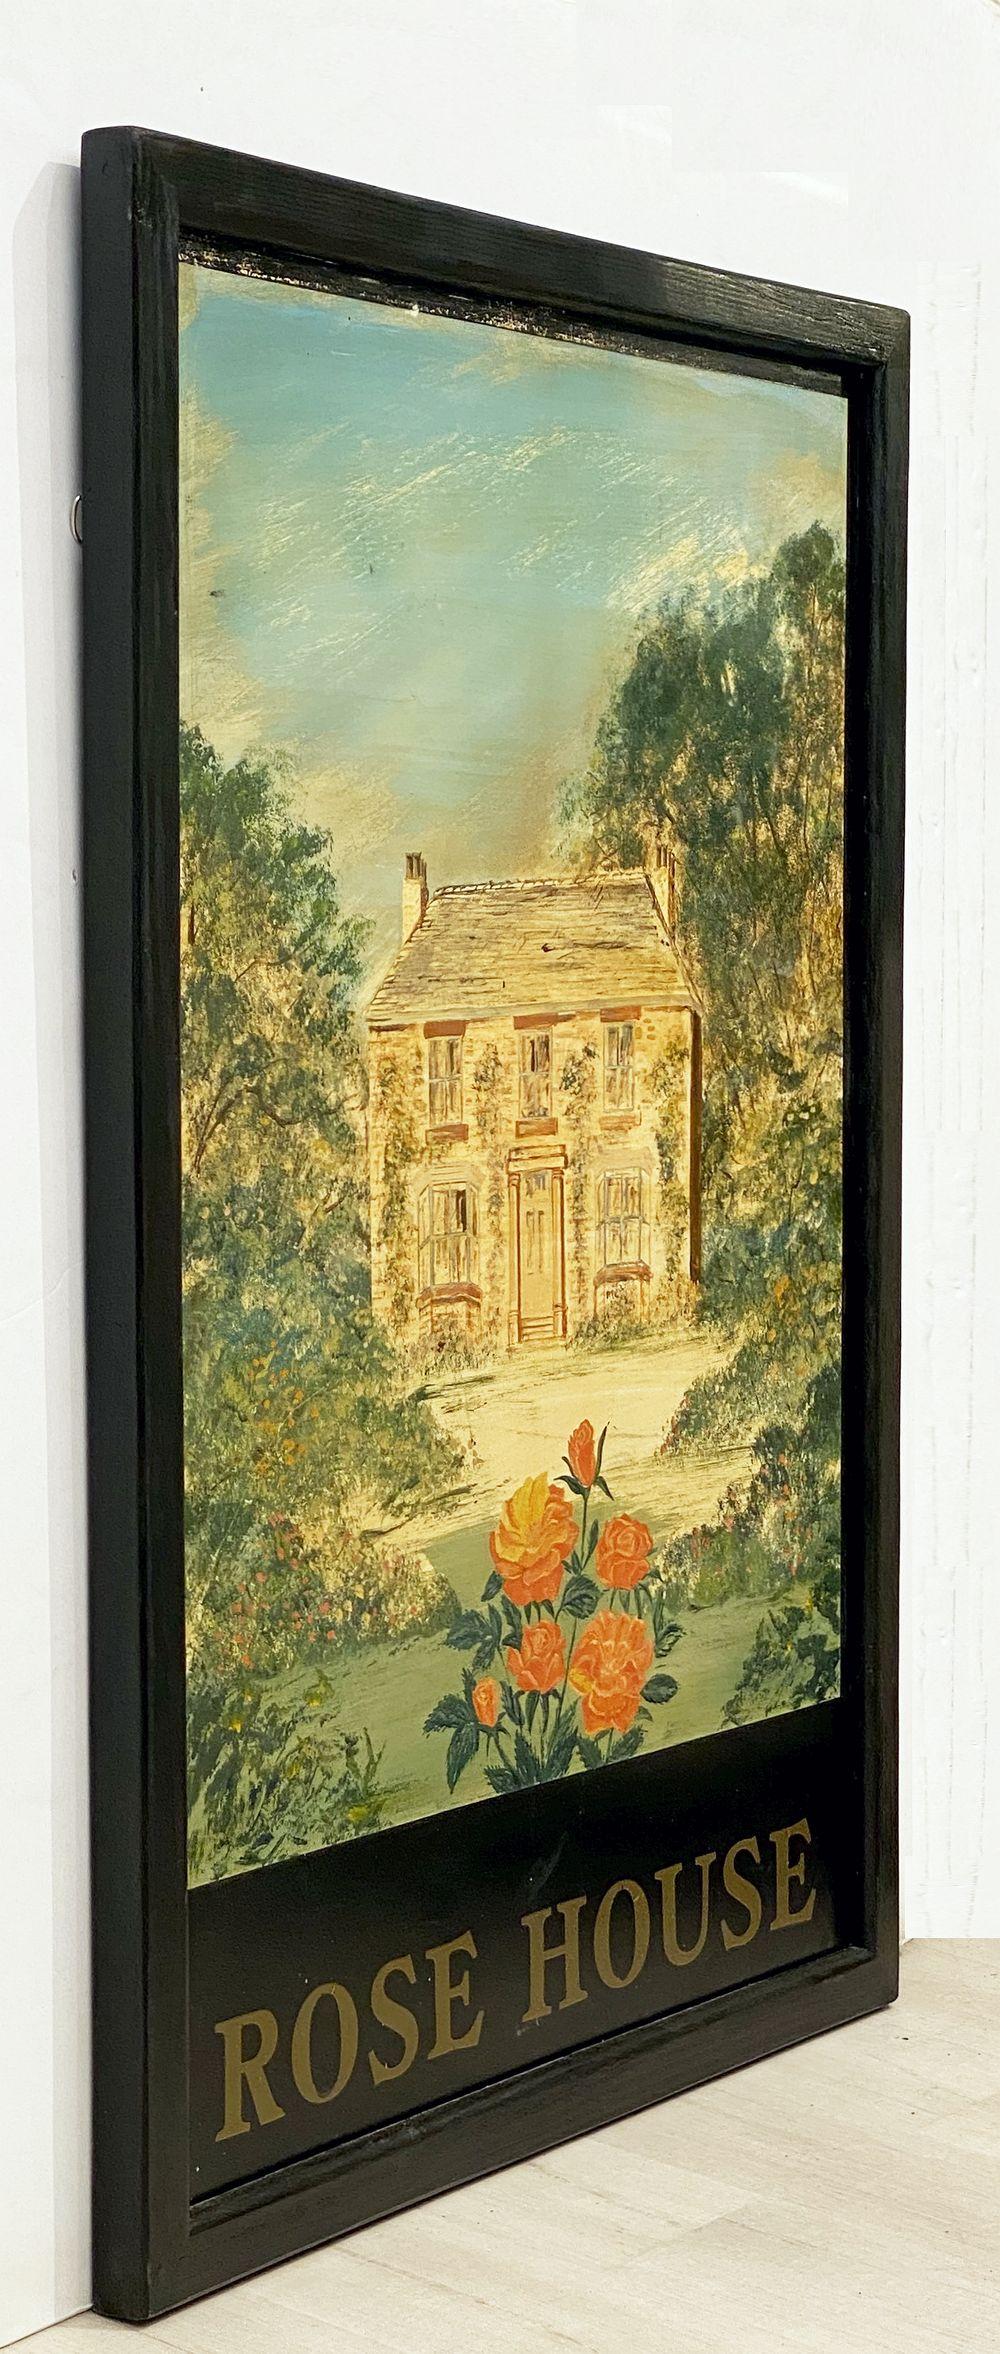 An authentic English pub sign (one-sided) featuring a painting of a house with roses, entitled: Rose House.

A very fine example of vintage advertising artwork, ready for display.